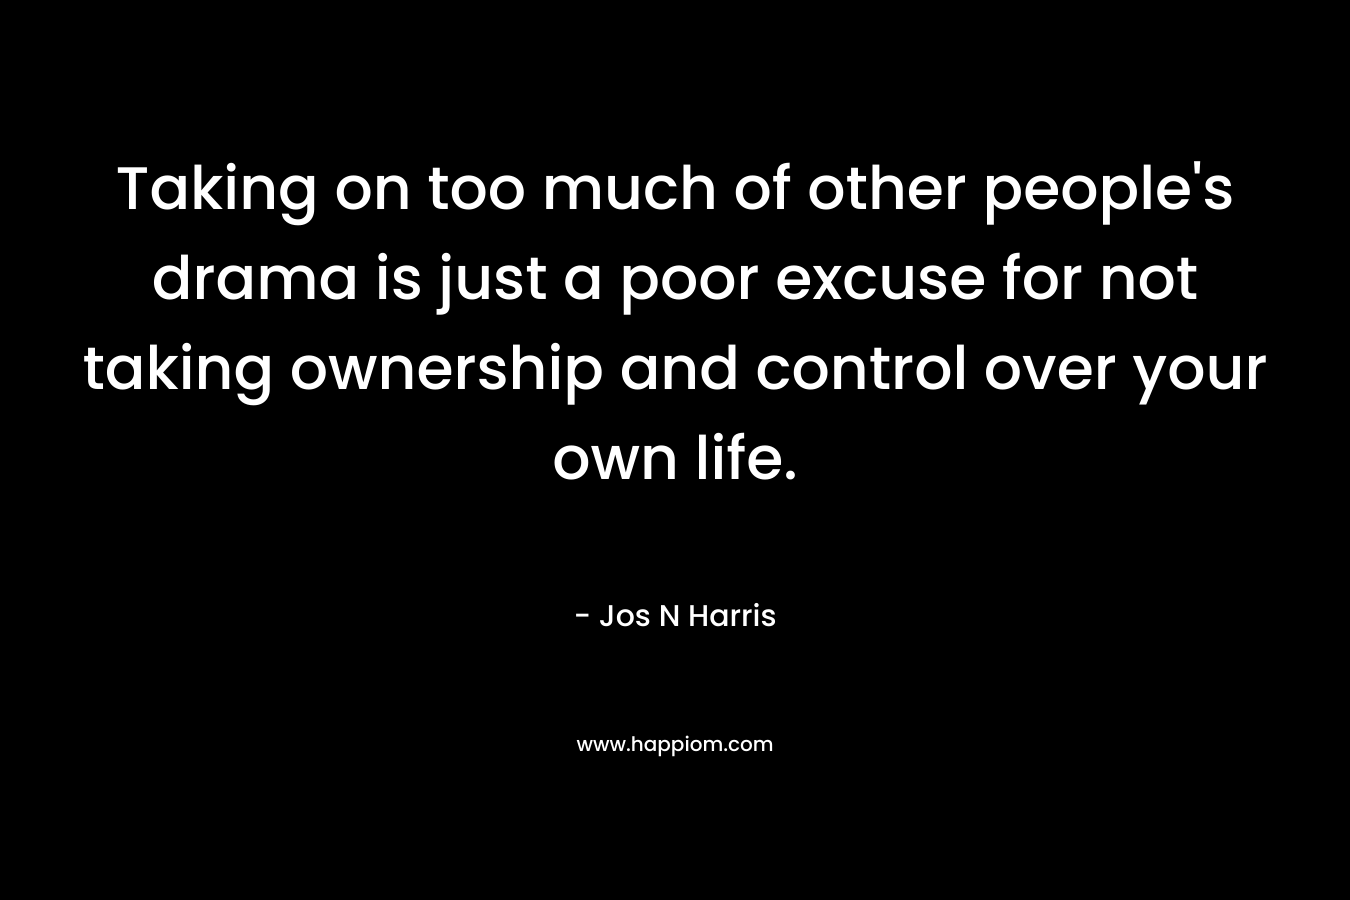 Taking on too much of other people’s drama is just a poor excuse for not taking ownership and control over your own life. – Jos N Harris